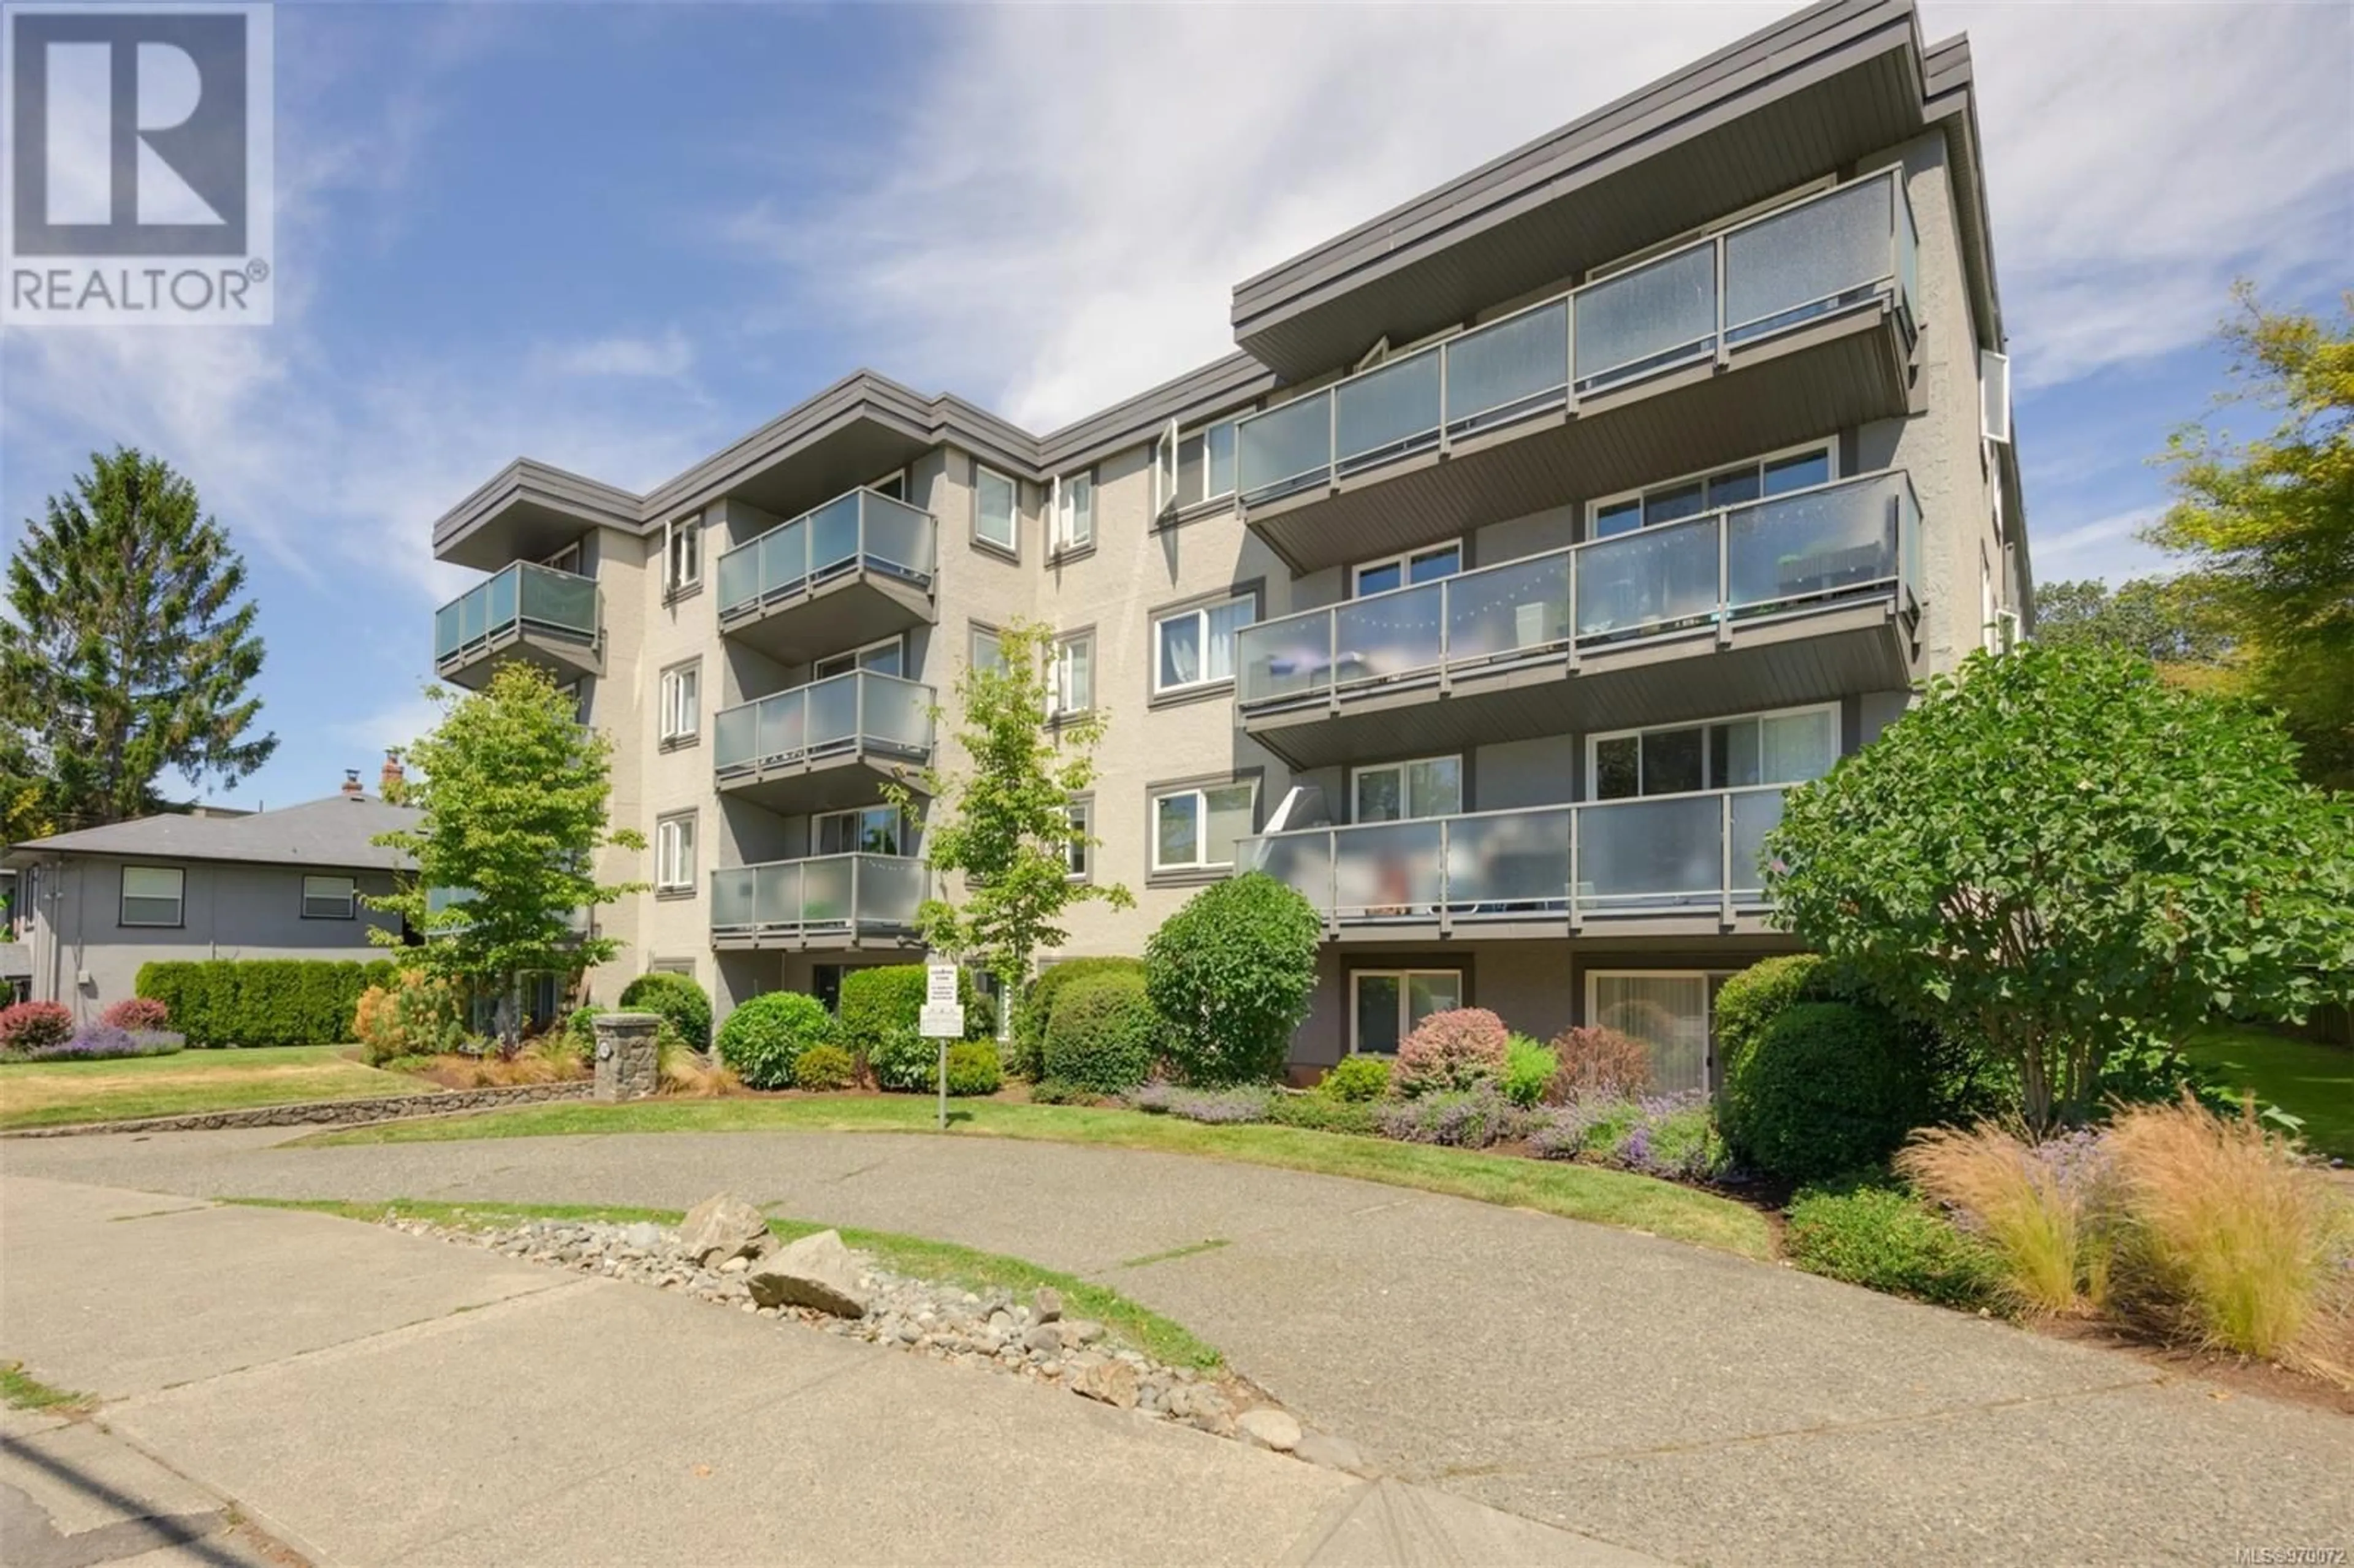 A pic from exterior of the house or condo for 204 1342 Hillside Ave, Victoria British Columbia V8T2B4